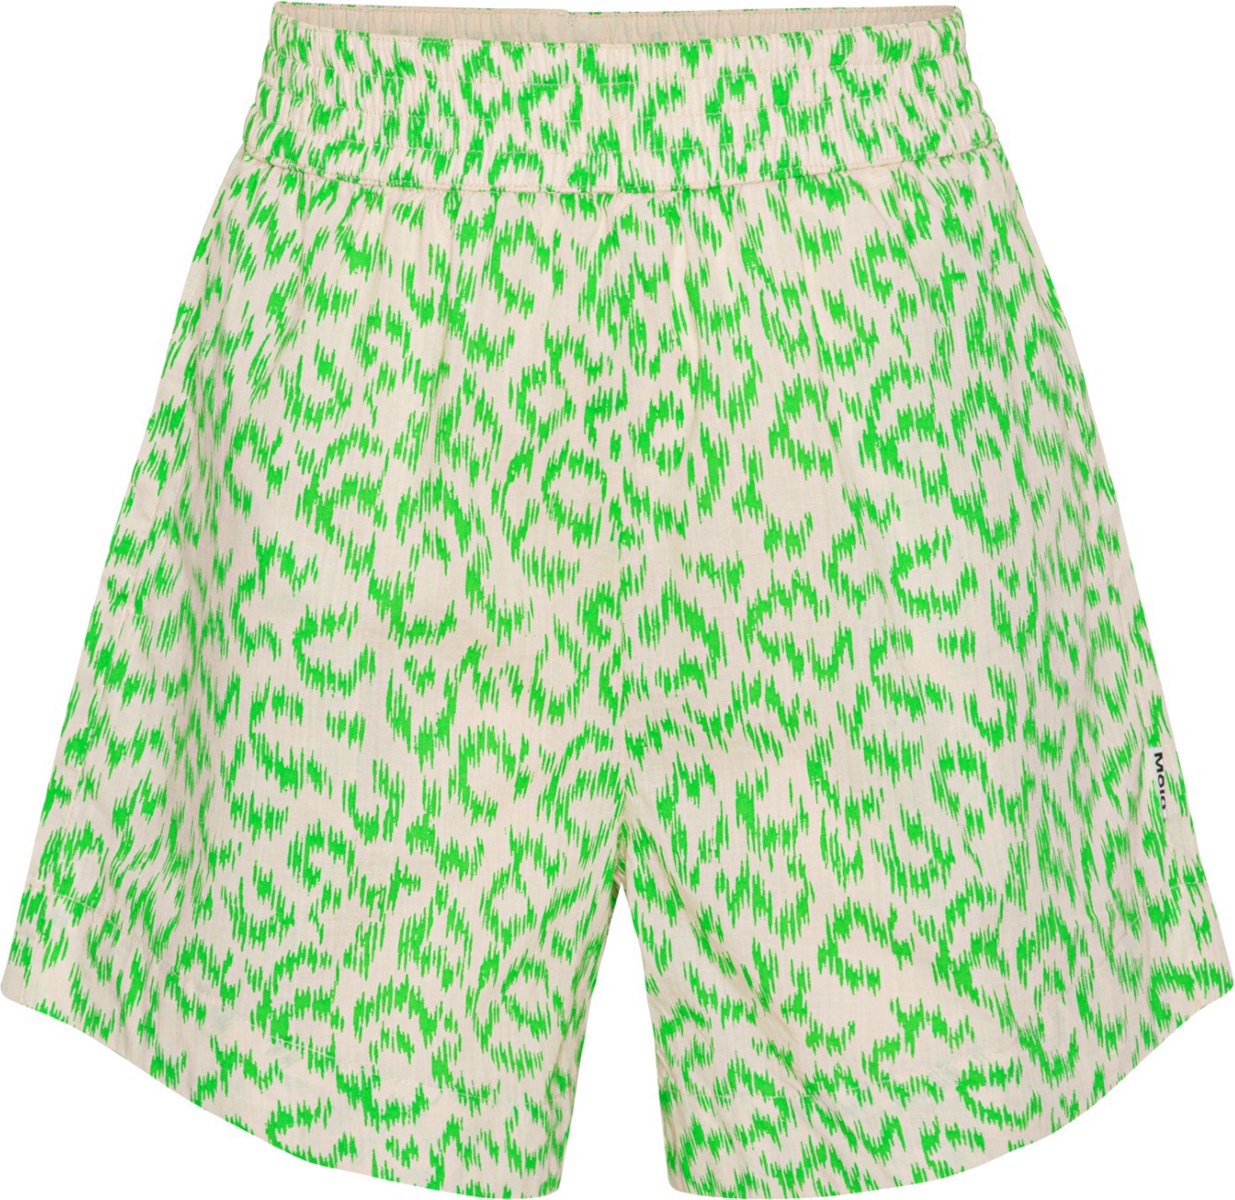 Green leopard print top & shorts set for girl.